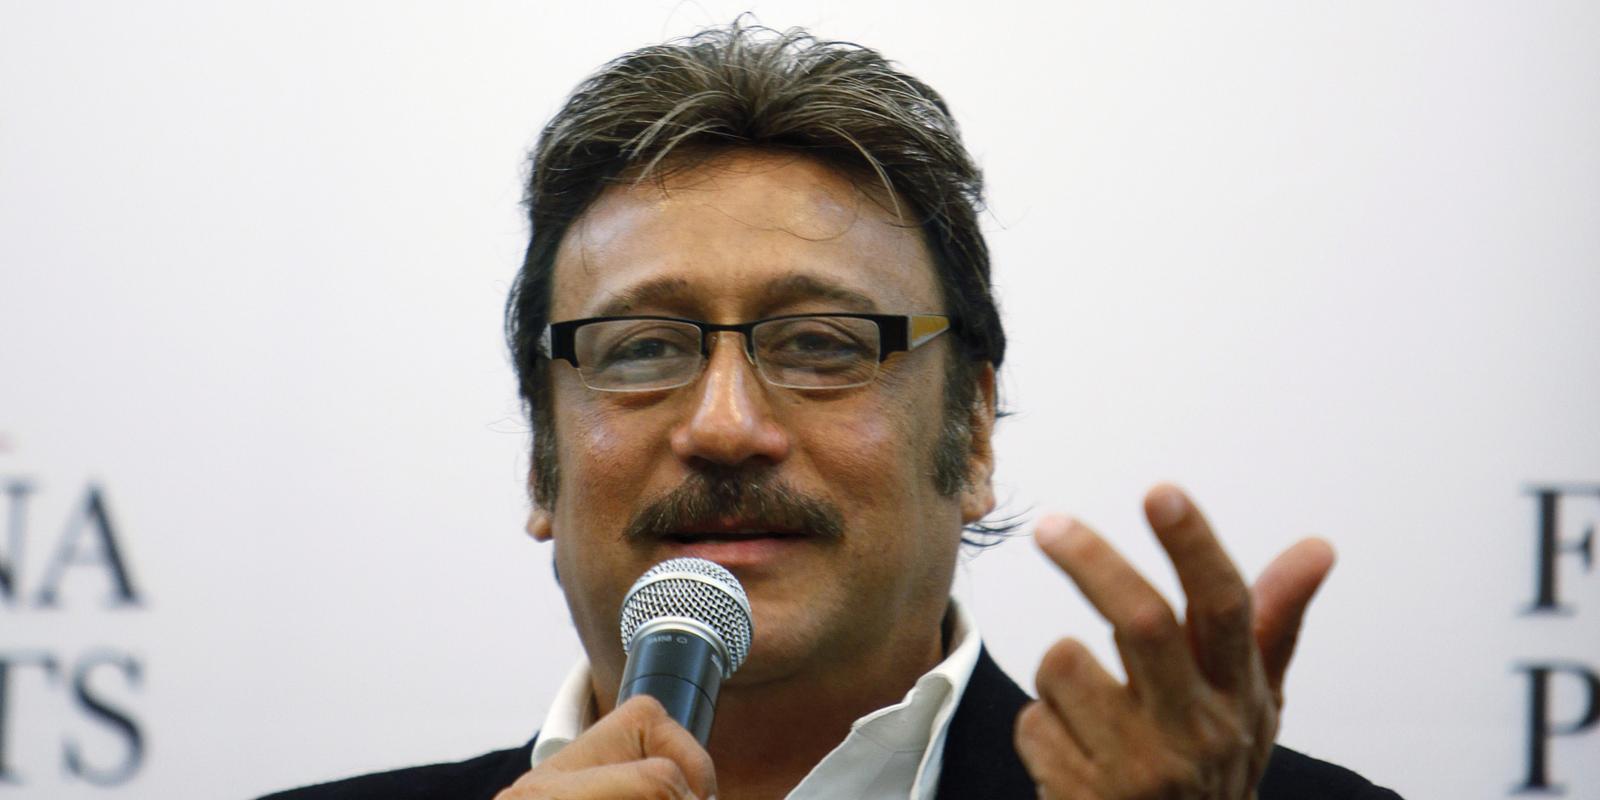 Jackie Shroff Net Worth 2021 In Indian Rupees